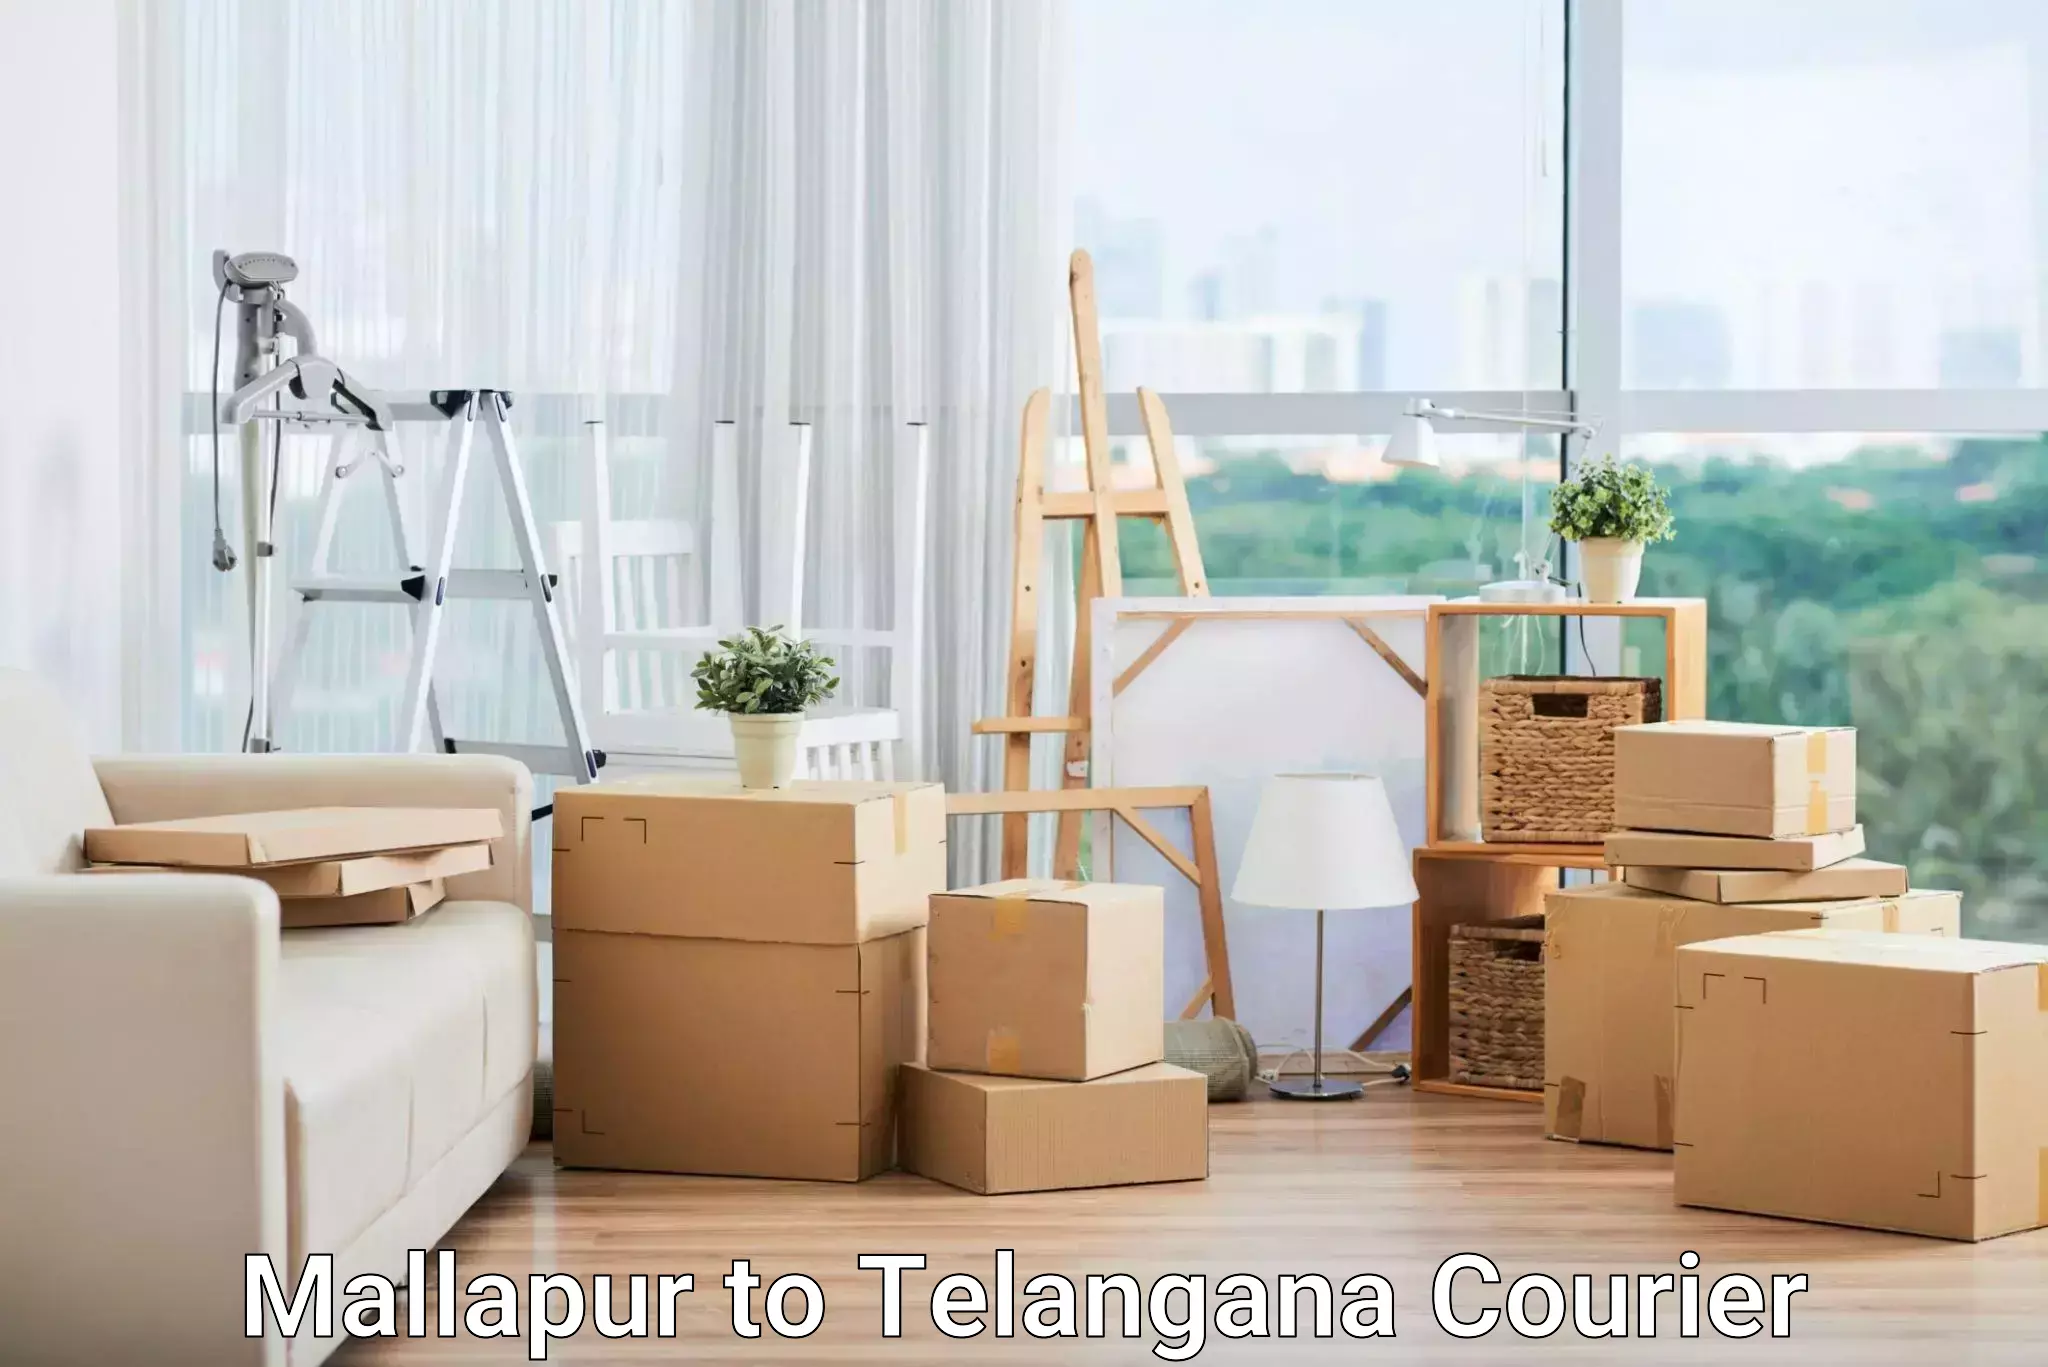 Reliable courier service Mallapur to Wanaparthy